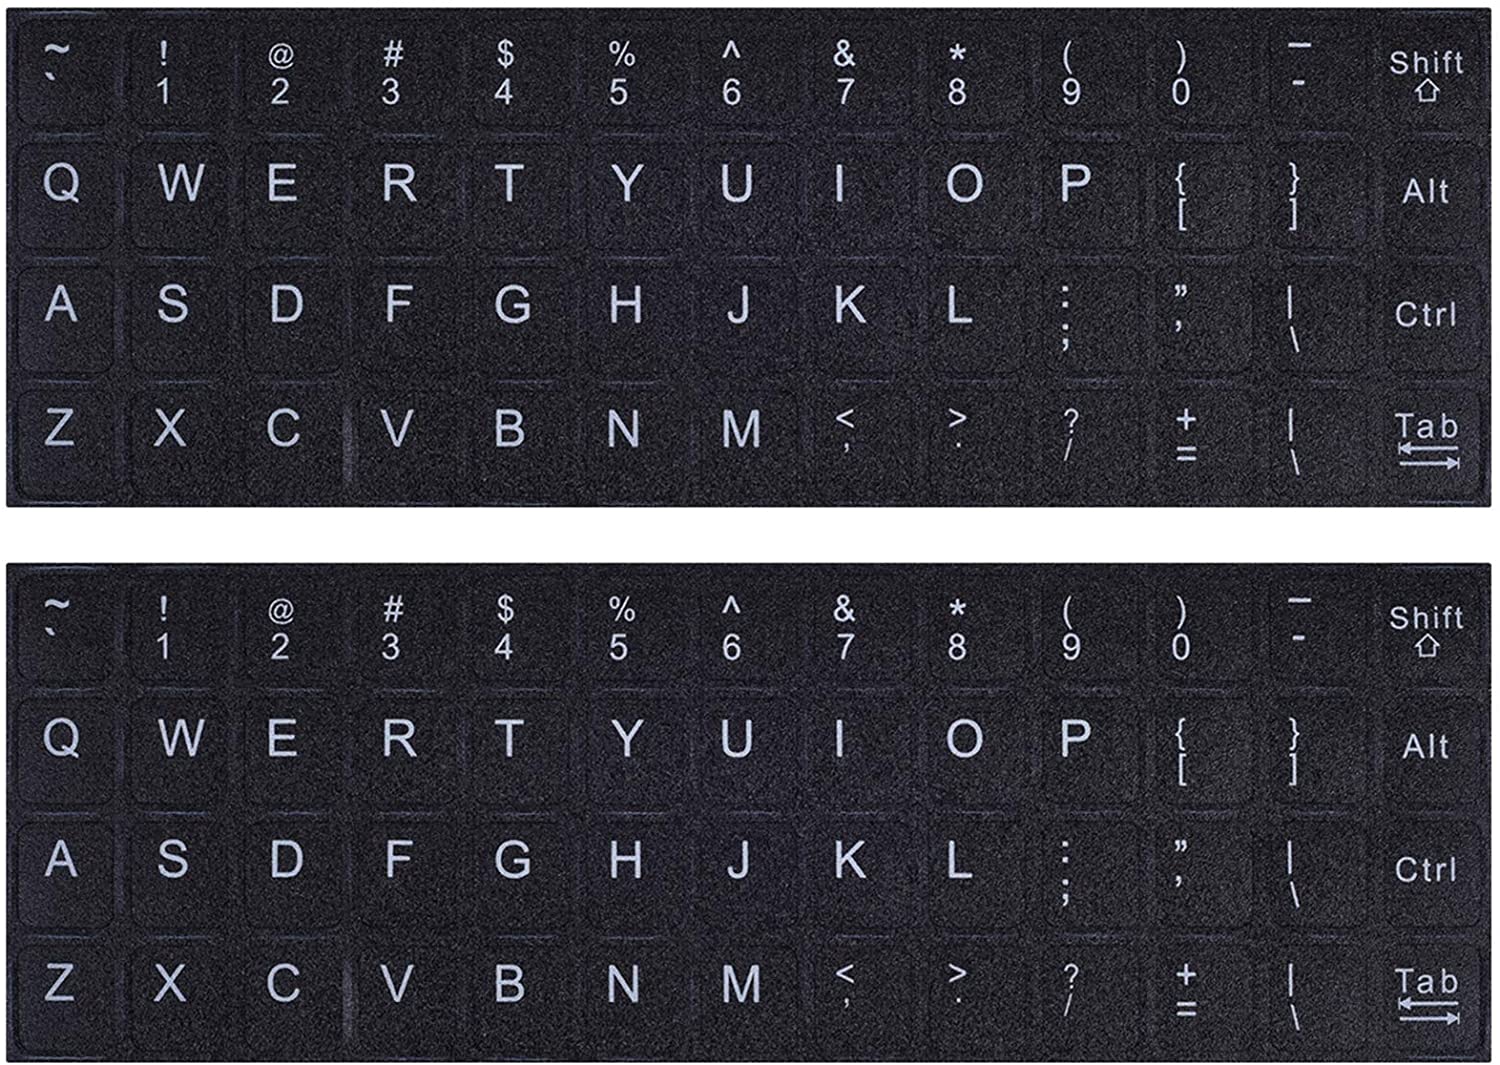 Universal English Keyboard Stickers, Computer Keyboard Stickers Black Background With White Lettering For Computer Laptop Notebook Desktop (English)